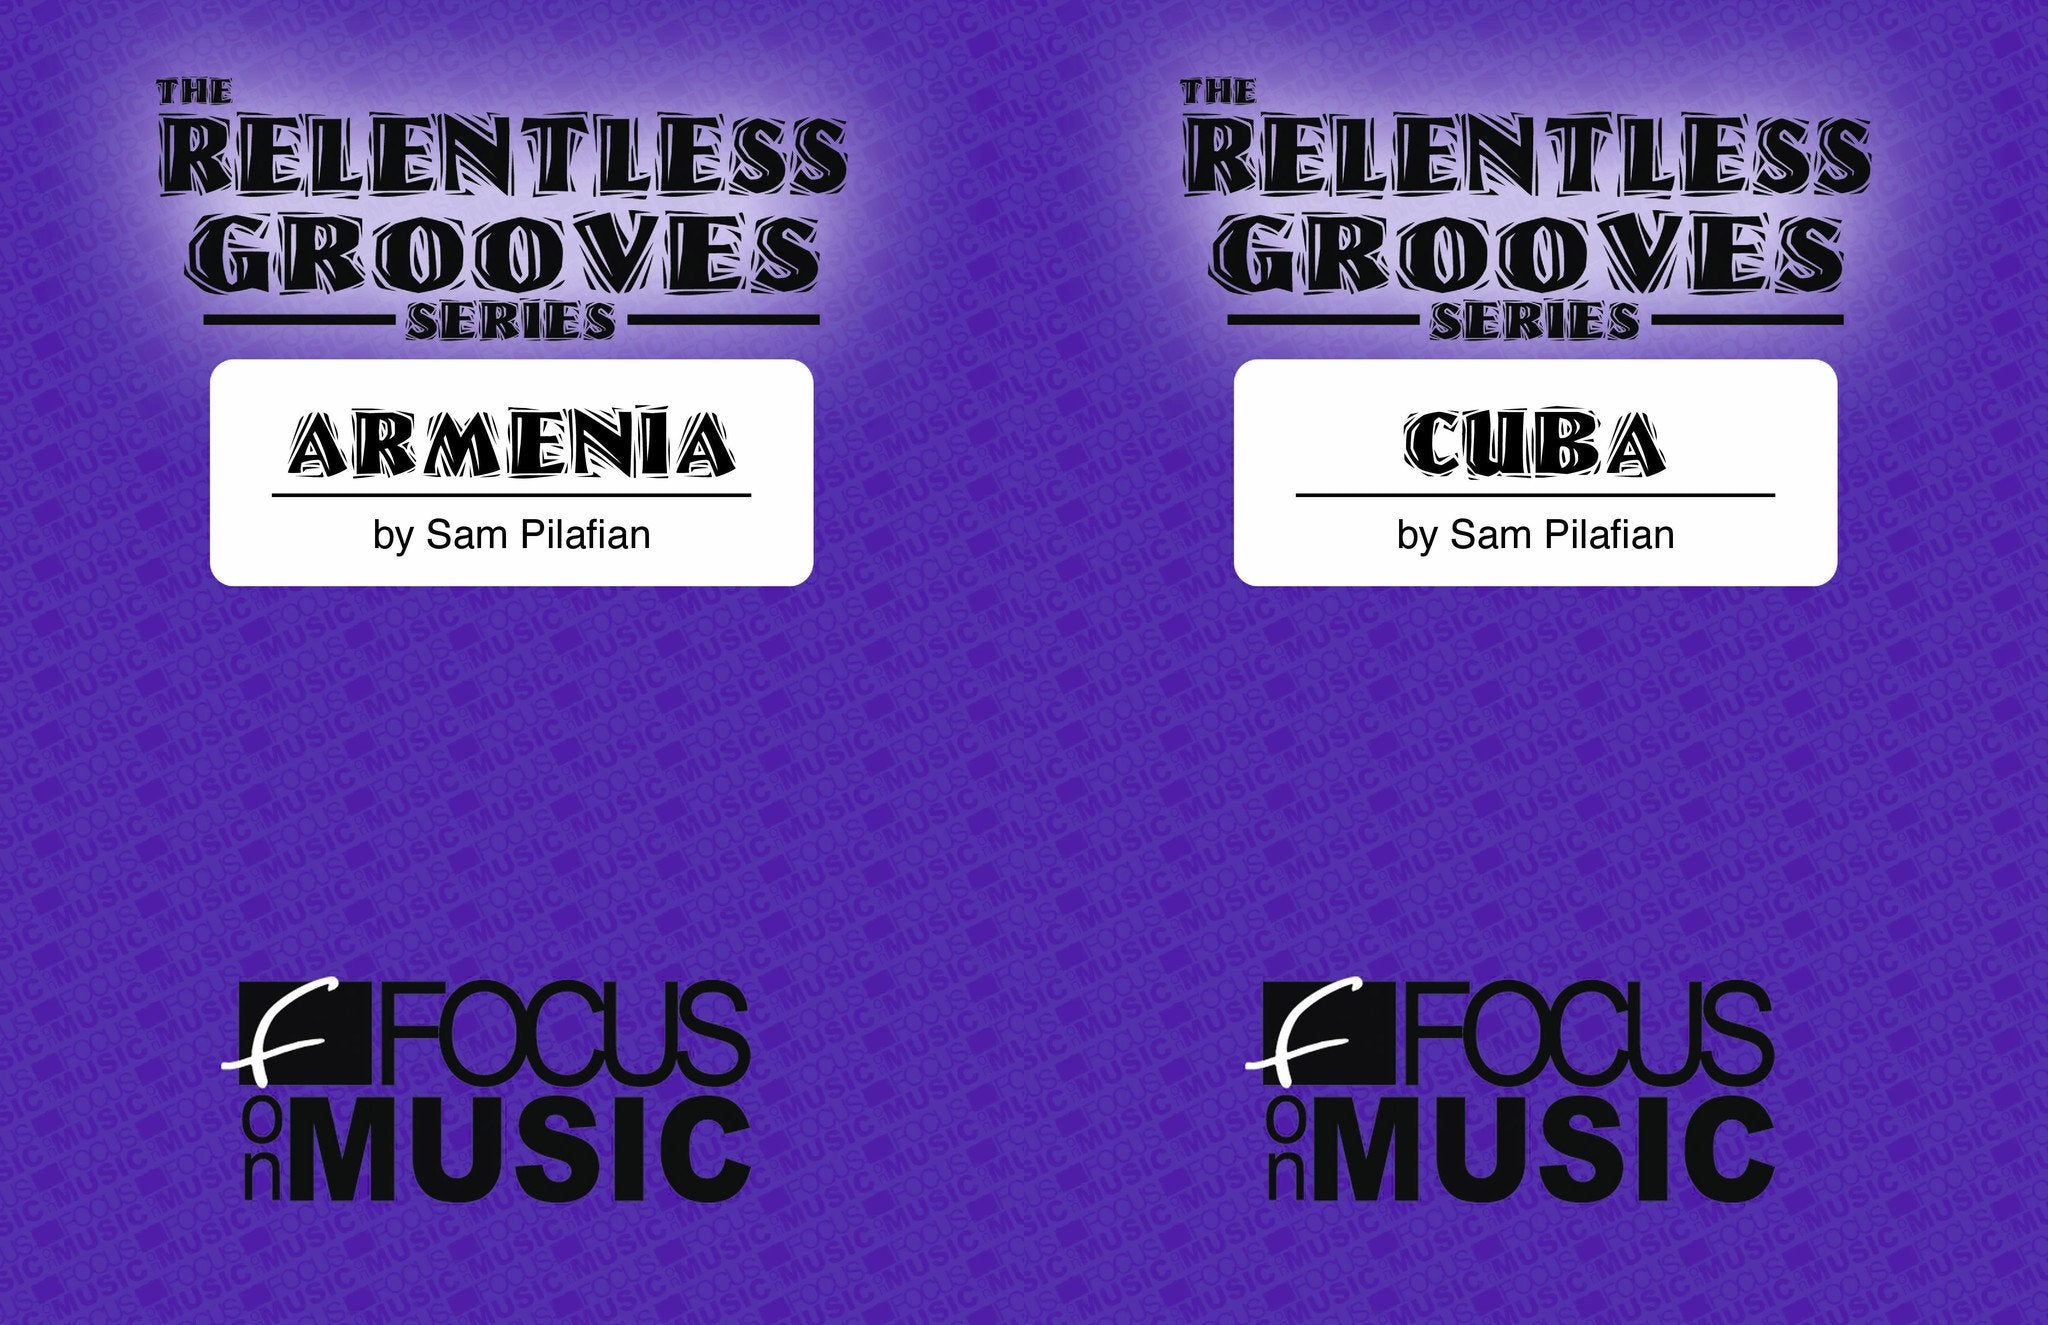 The Relentless Grooves Series